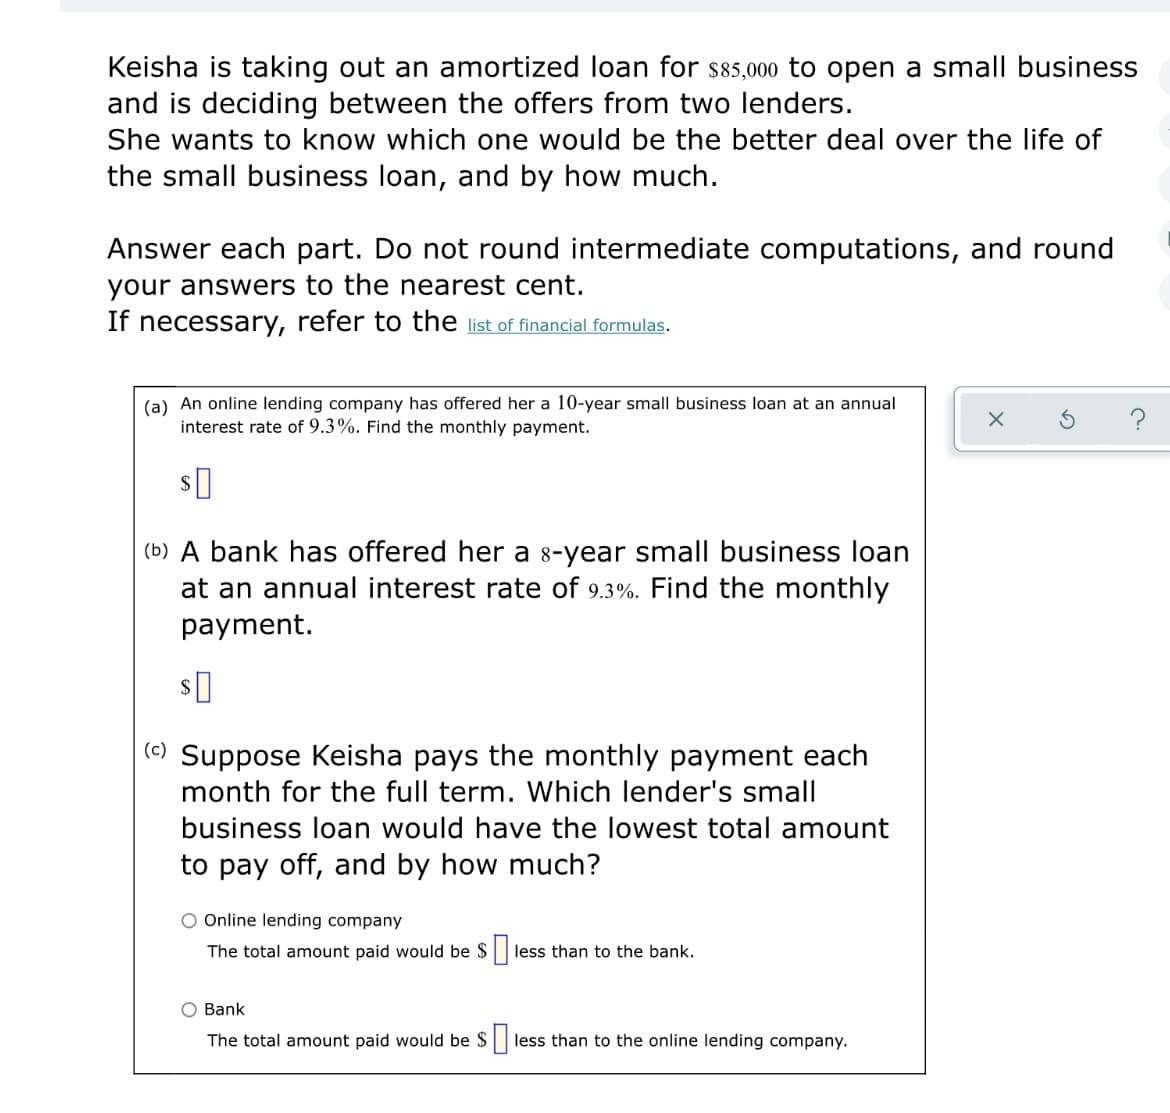 Keisha is taking out an amortized loan for $85,000 to open a small business
and is deciding between the offers from two lenders.
She wants to know which one would be the better deal over the life of
the small business loan, and by how much.
Answer each part. Do not round intermediate computations, and round
your answers to the nearest cent.
If necessary, refer to the list of financial formulas.
(a) An online lending company has offered her a 10-year small business loan at an annual
interest rate of 9.3%. Find the monthly payment.
?
(b) A bank has offered her a 8-year small business loan
at an annual interest rate of 9.3%. Find the monthly
payment.
() Suppose Keisha pays the monthly payment each
month for the full term. Which lender's small
business loan would have the lowest total amount
to pay off, and by how much?
O Online lending company
The total amount paid would be $
less than to the bank.
O Bank
The total amount paid would be $|
less than to the online lending company.
